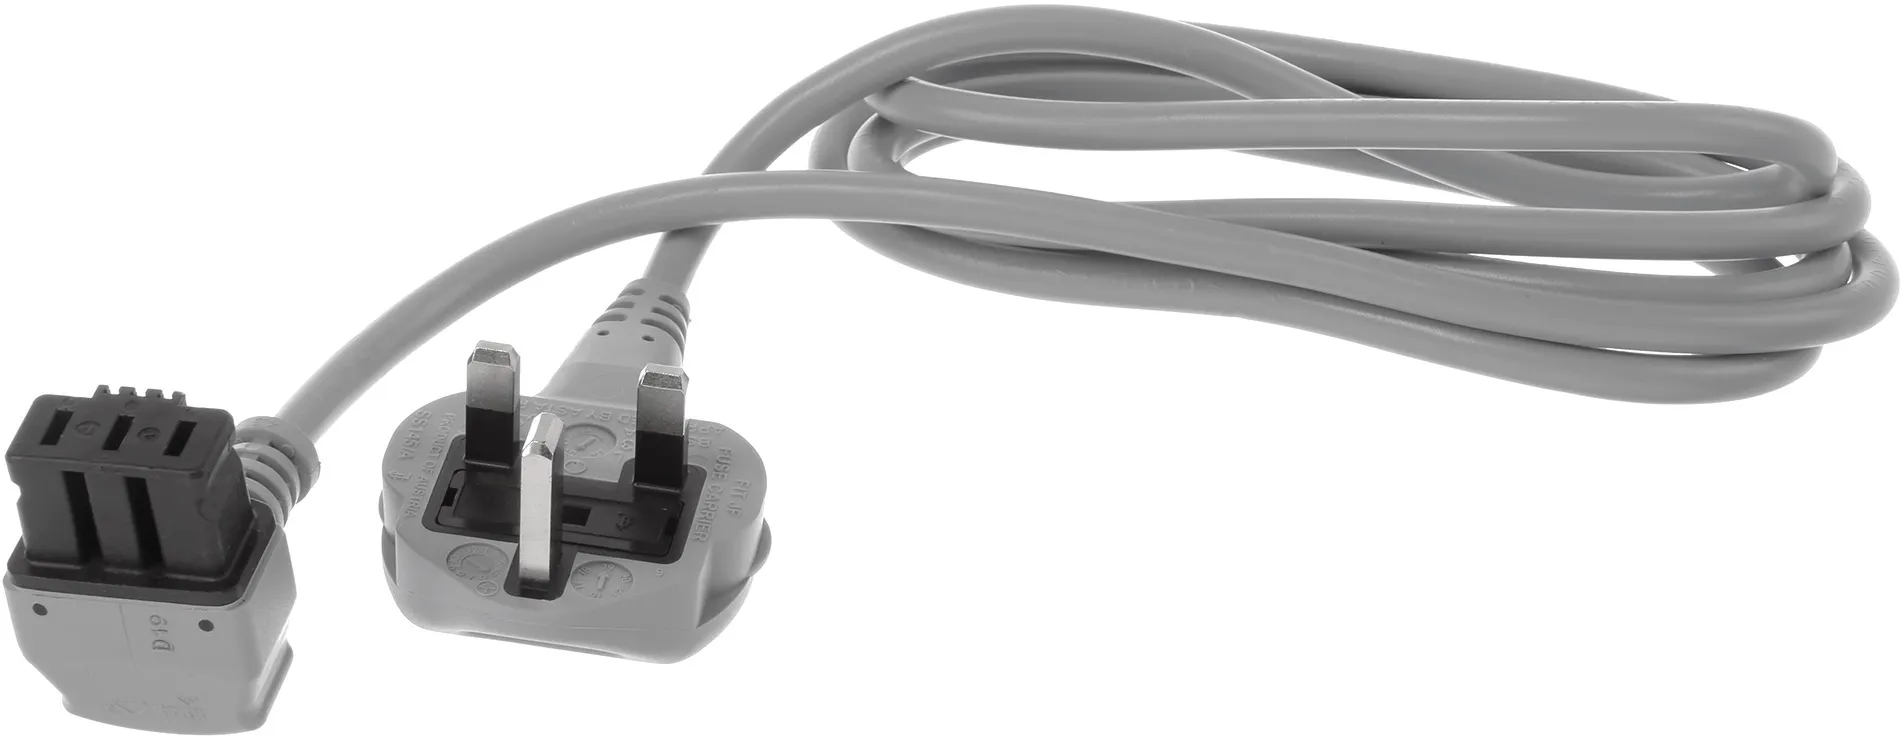 Dishwasher Mains Power Cable 